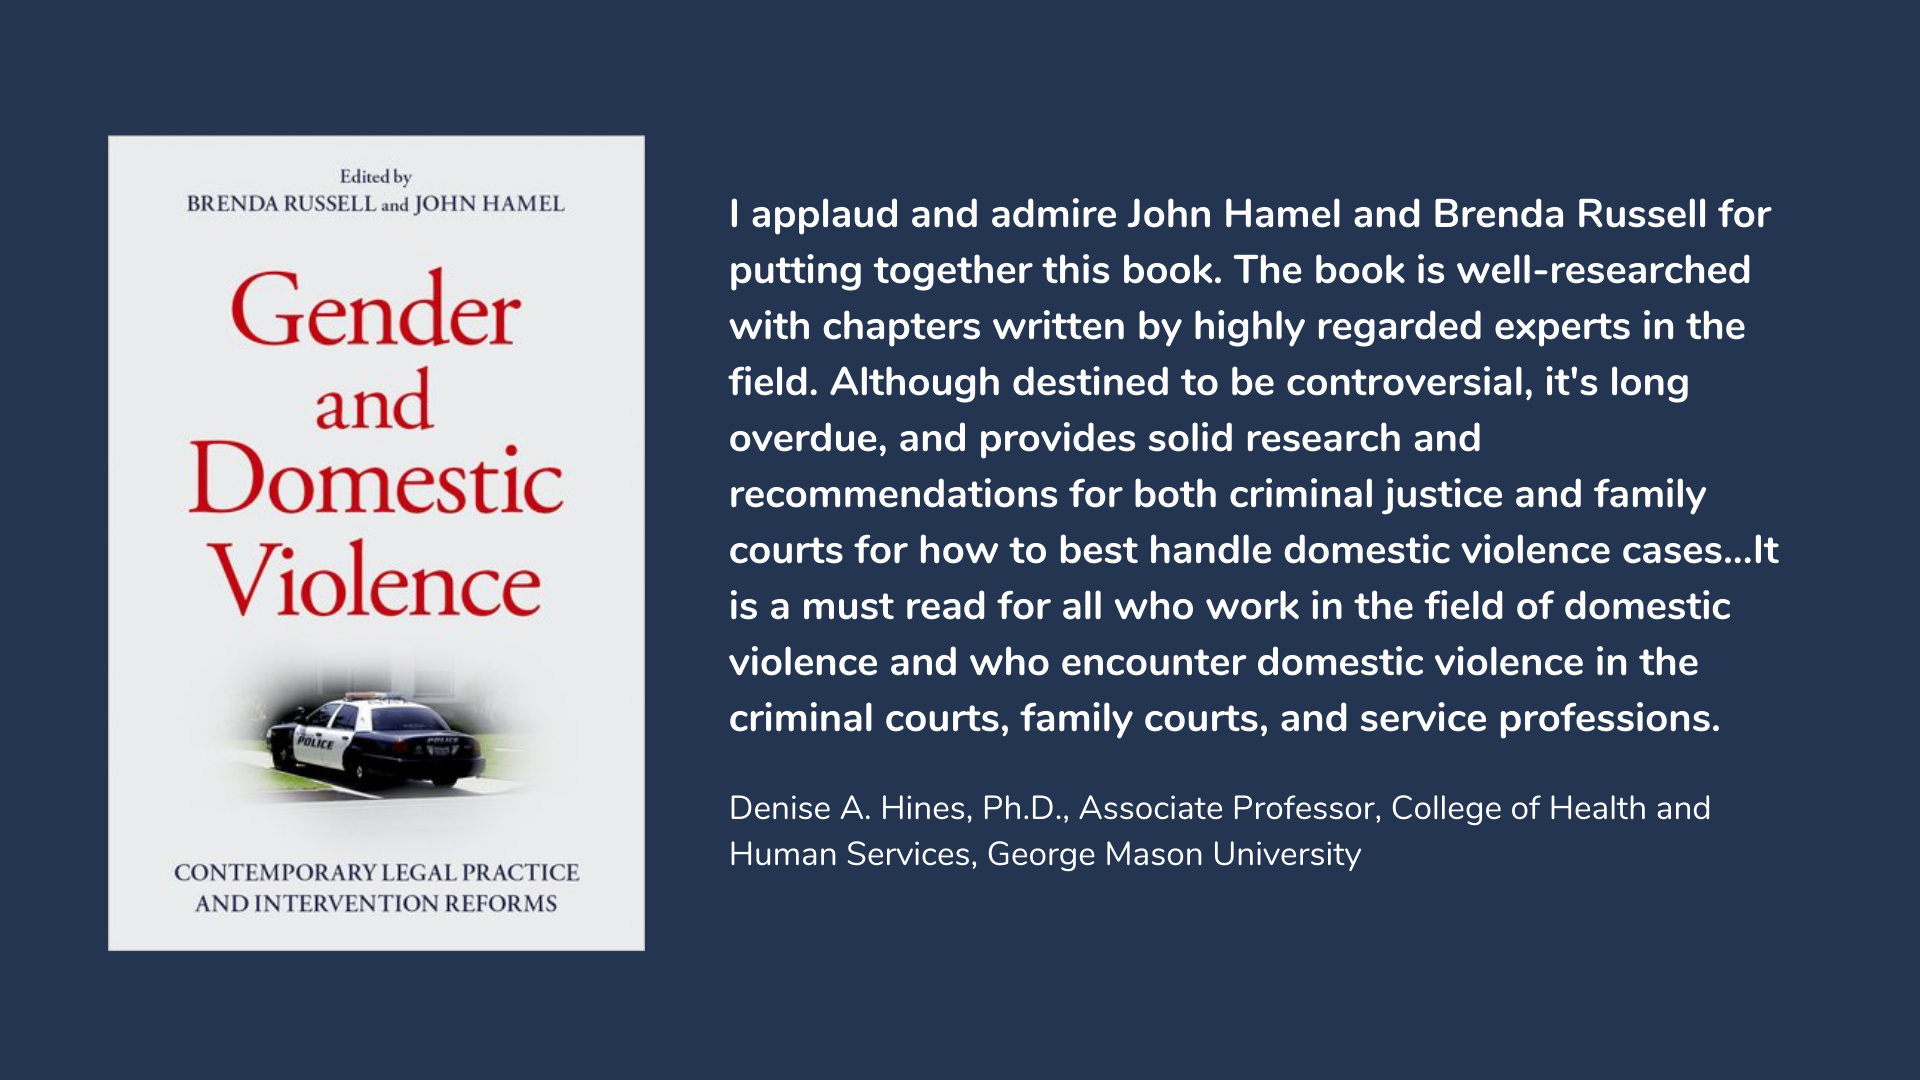 Gender and Domestic Violence: Contemporary Legal Practice and Intervention Reforms, book cover and description.